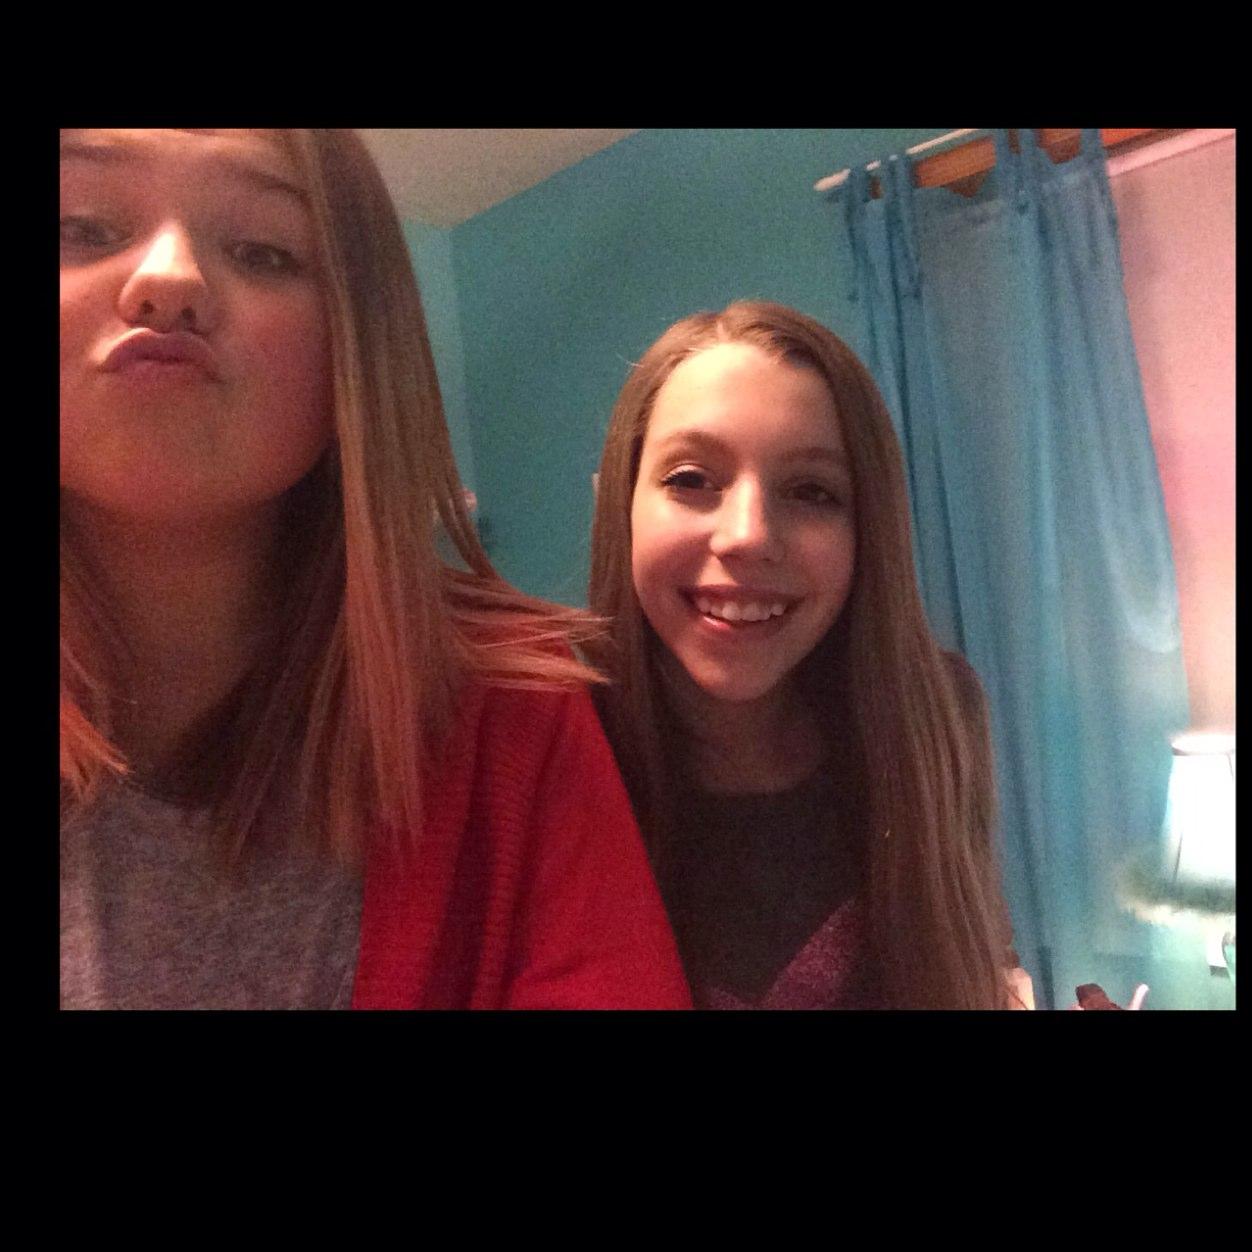 subscribe to our YouTube account zoieandhailey